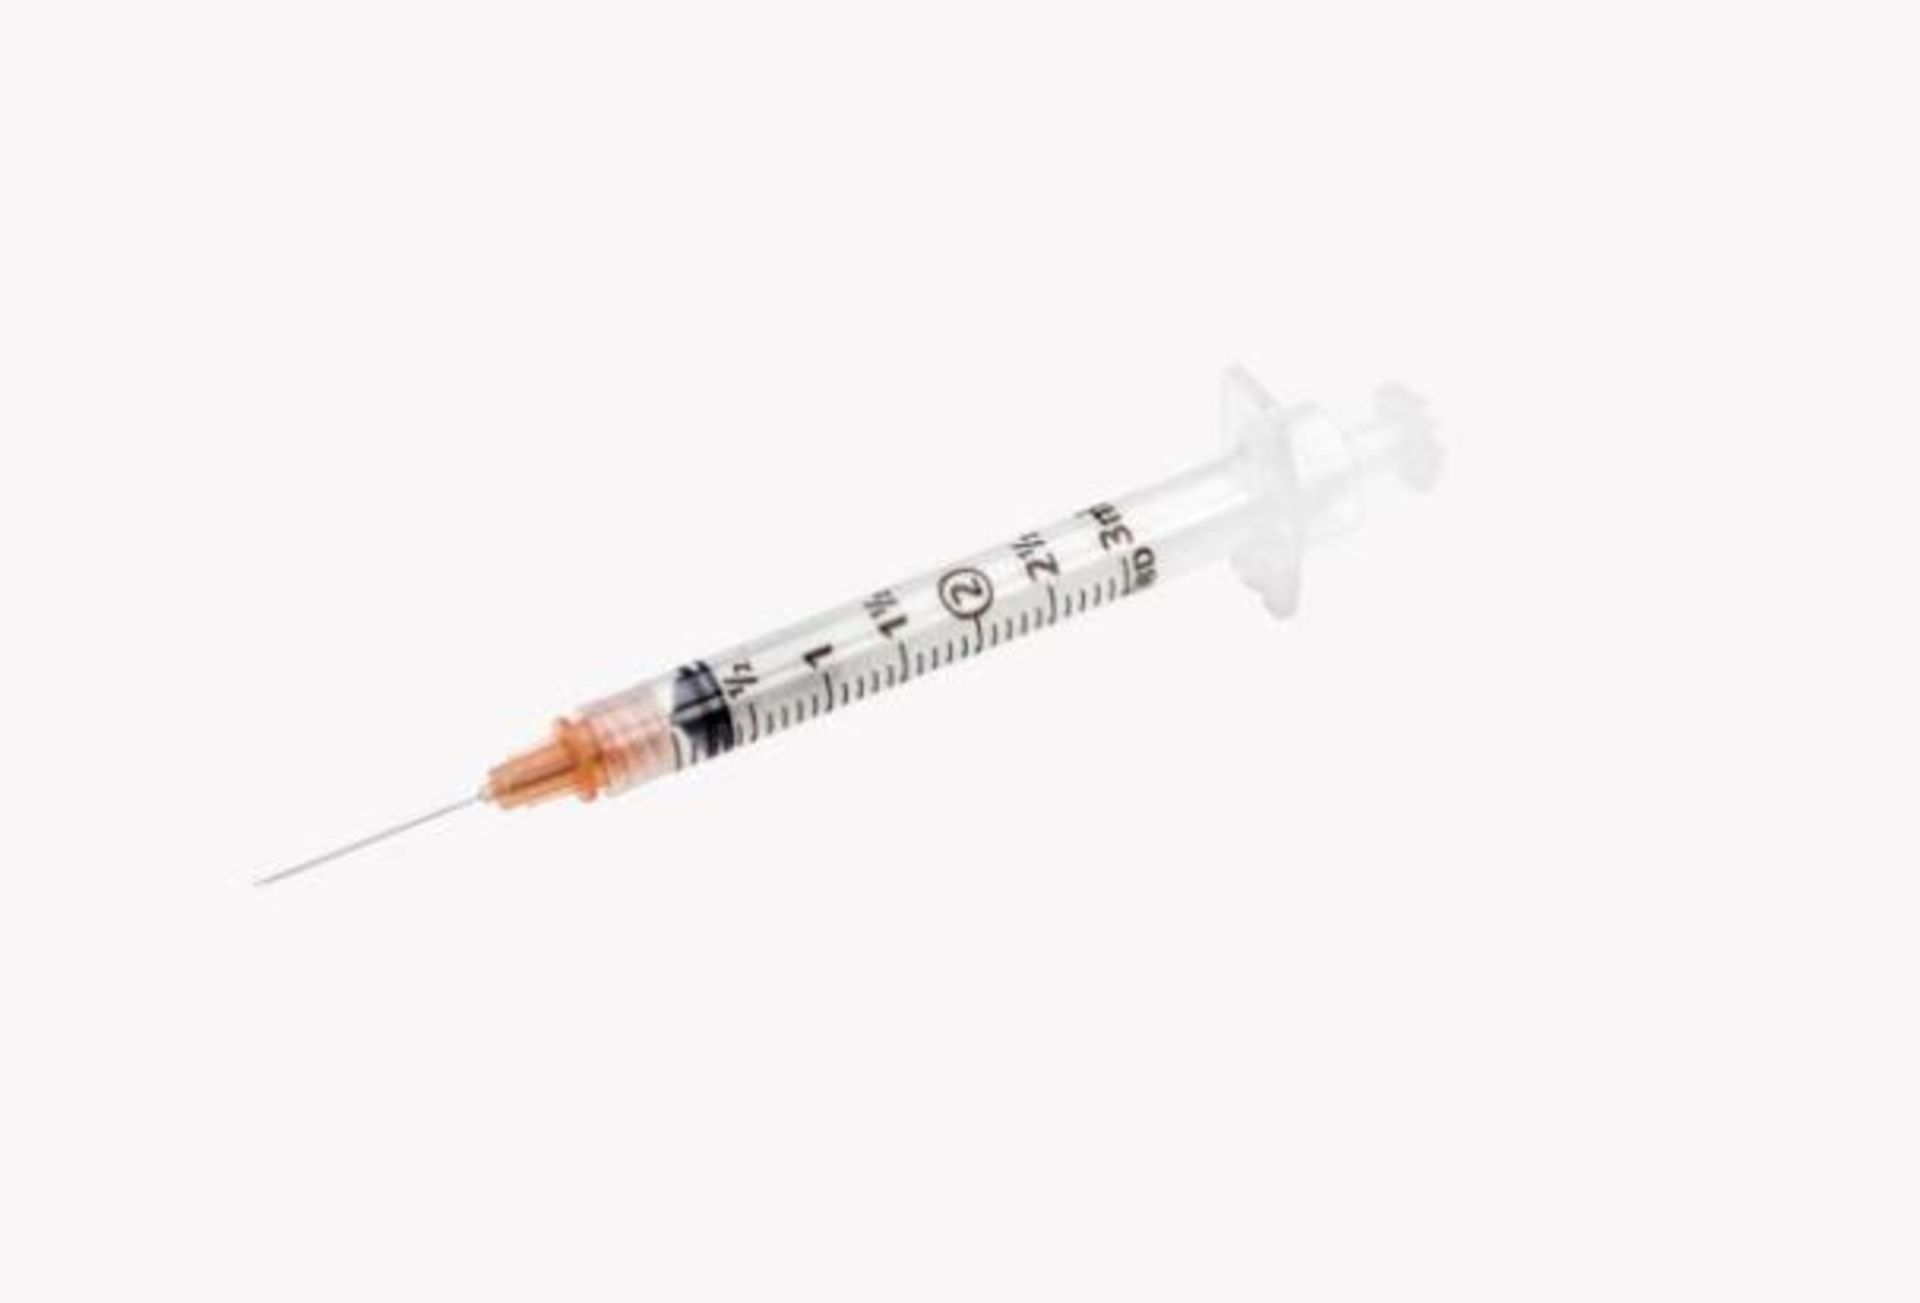 Lot of 500 3 mL BD Integra Retracting Safety Syringe with 25 G x 1 in. - Image 3 of 3